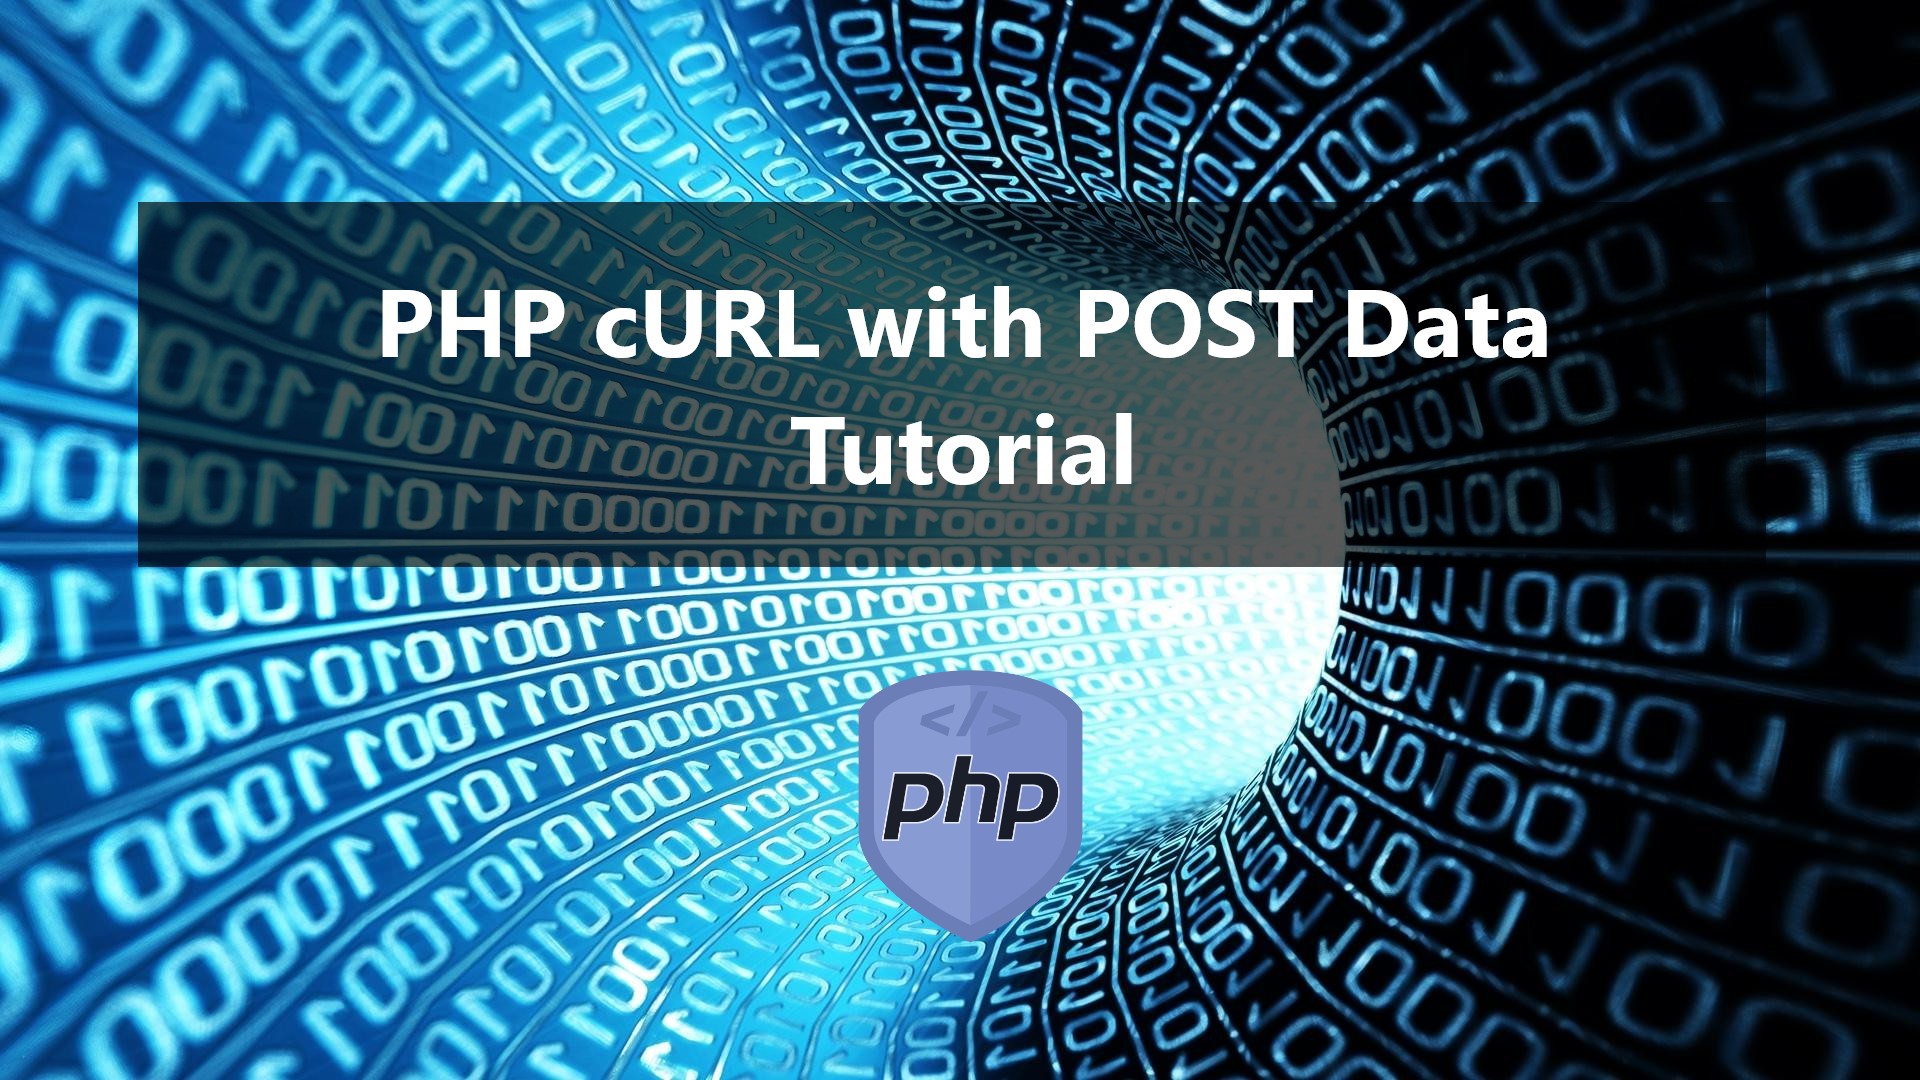 How to use cURL in PHP